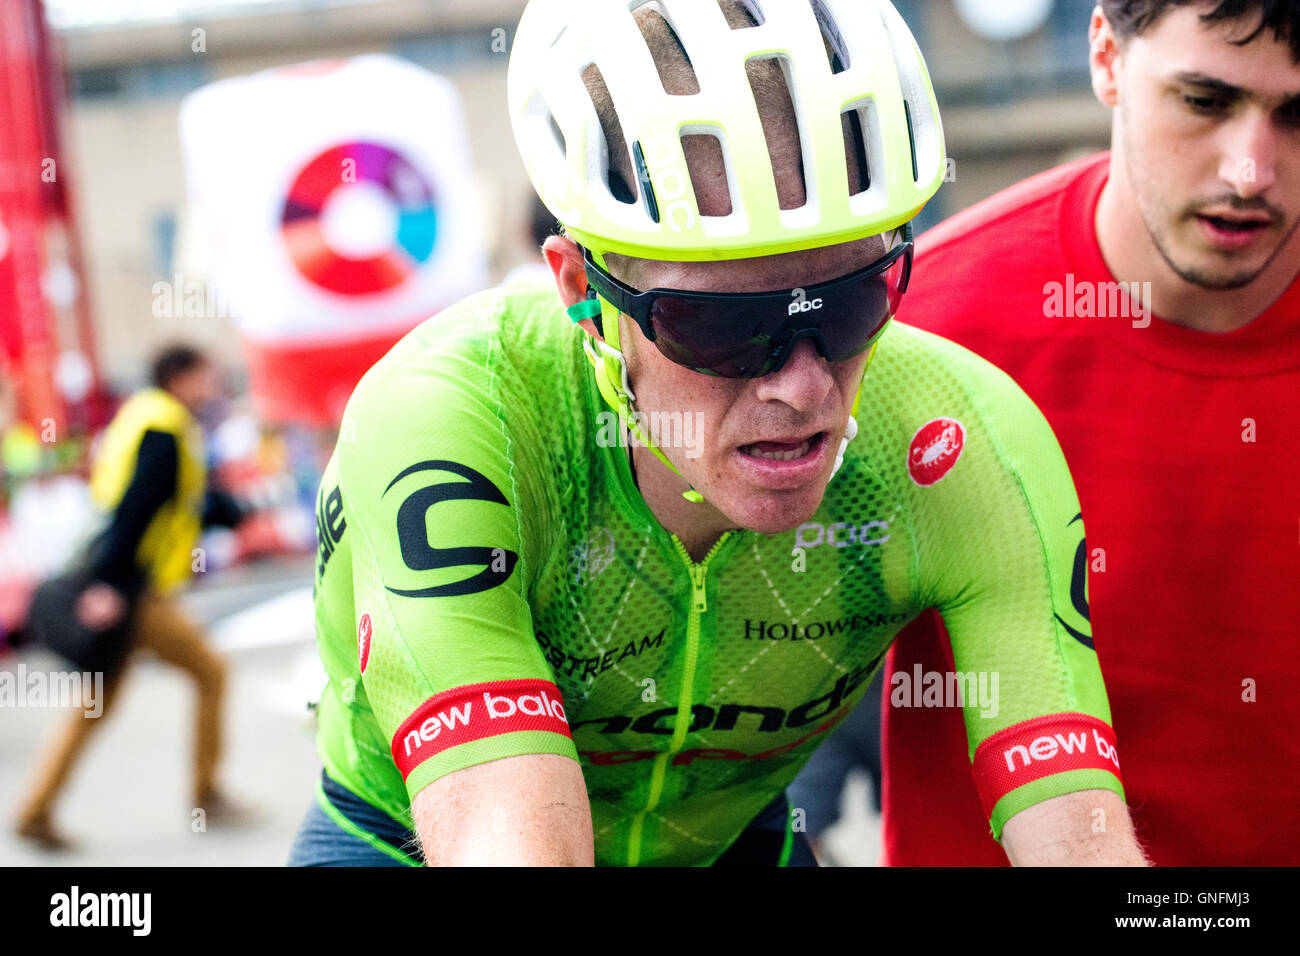 Peña Cabarga, Spain. 31th August, 2016. Andrew Talansky (Cannondale Drapac Pro Cycling Team) finishes the 11th stage of cycling race ‘La Vuelta a España’ (Tour of Spain) between Colunga and Peña Cabarga on August 31, 2016 in Peña Cabarga, Spain. Credit: David Gato/Alamy Live News Stock Photo